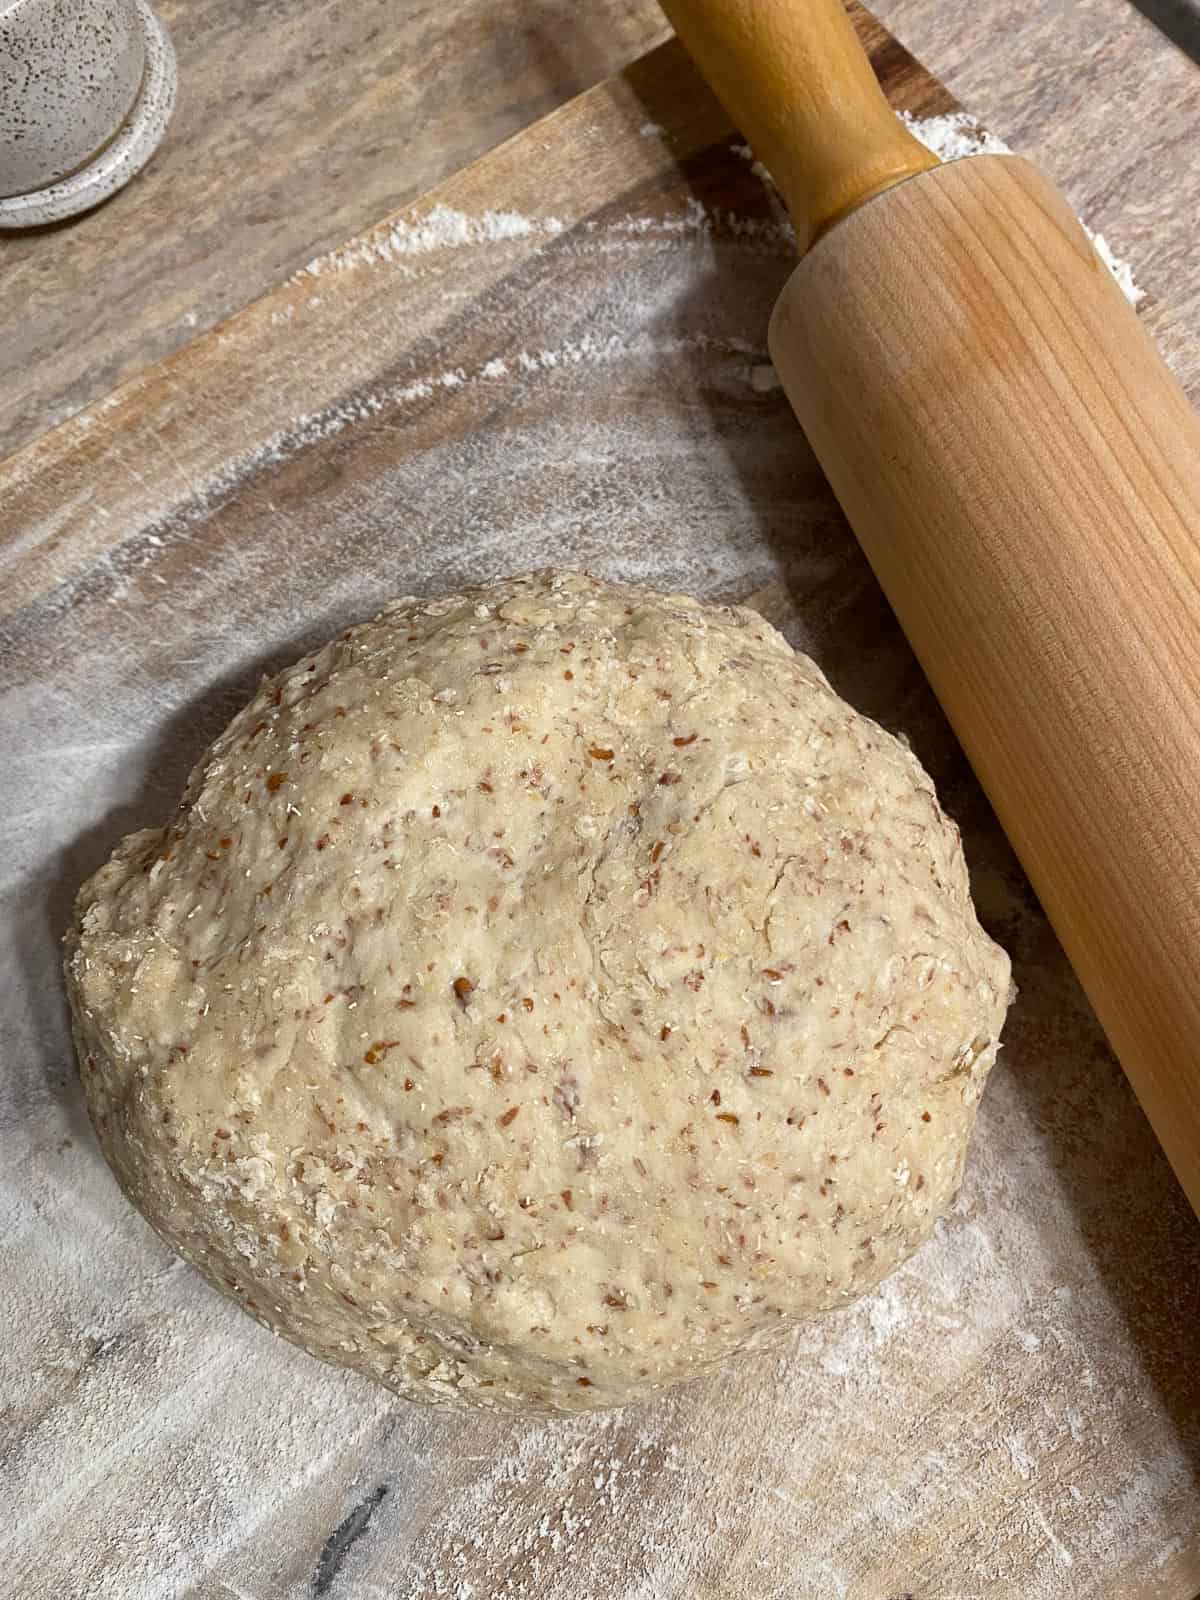 ball of dough on a surface alongside a rolling pin